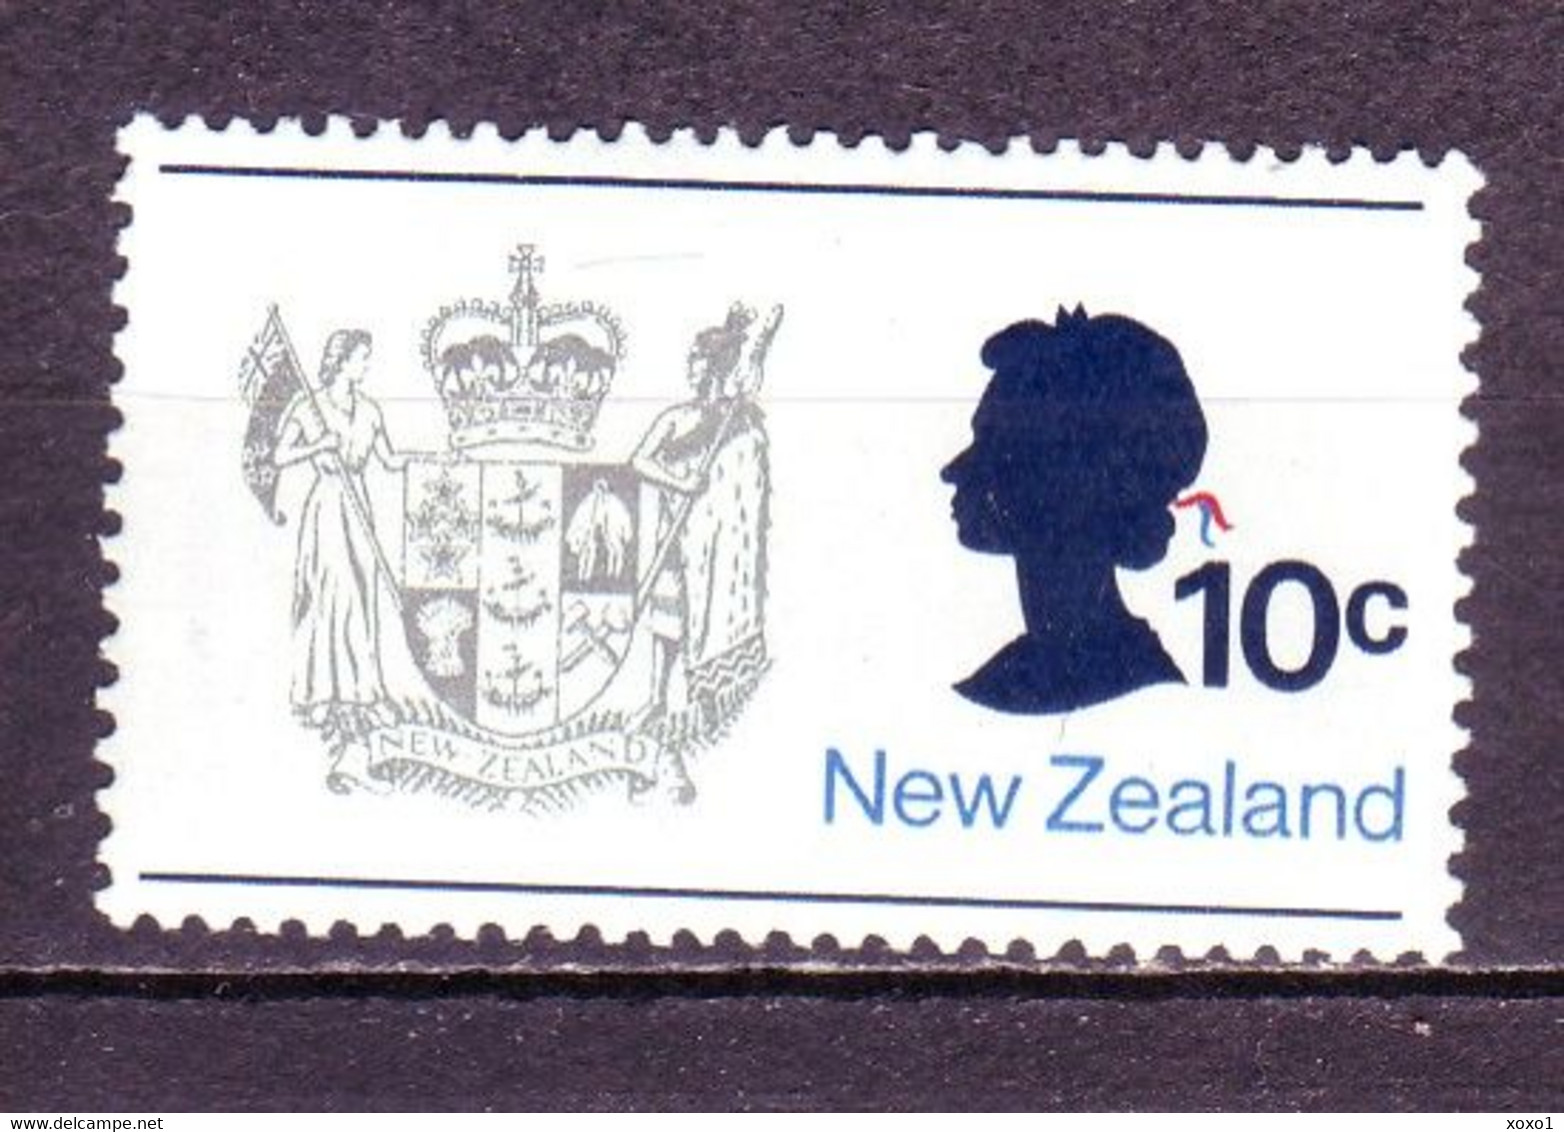 New Zealand 1970 MiNr. 518  Neuseeland  National Coat Of Arms, Queen Elizabeth II  1v MNH**  0,60 € - Unused Stamps